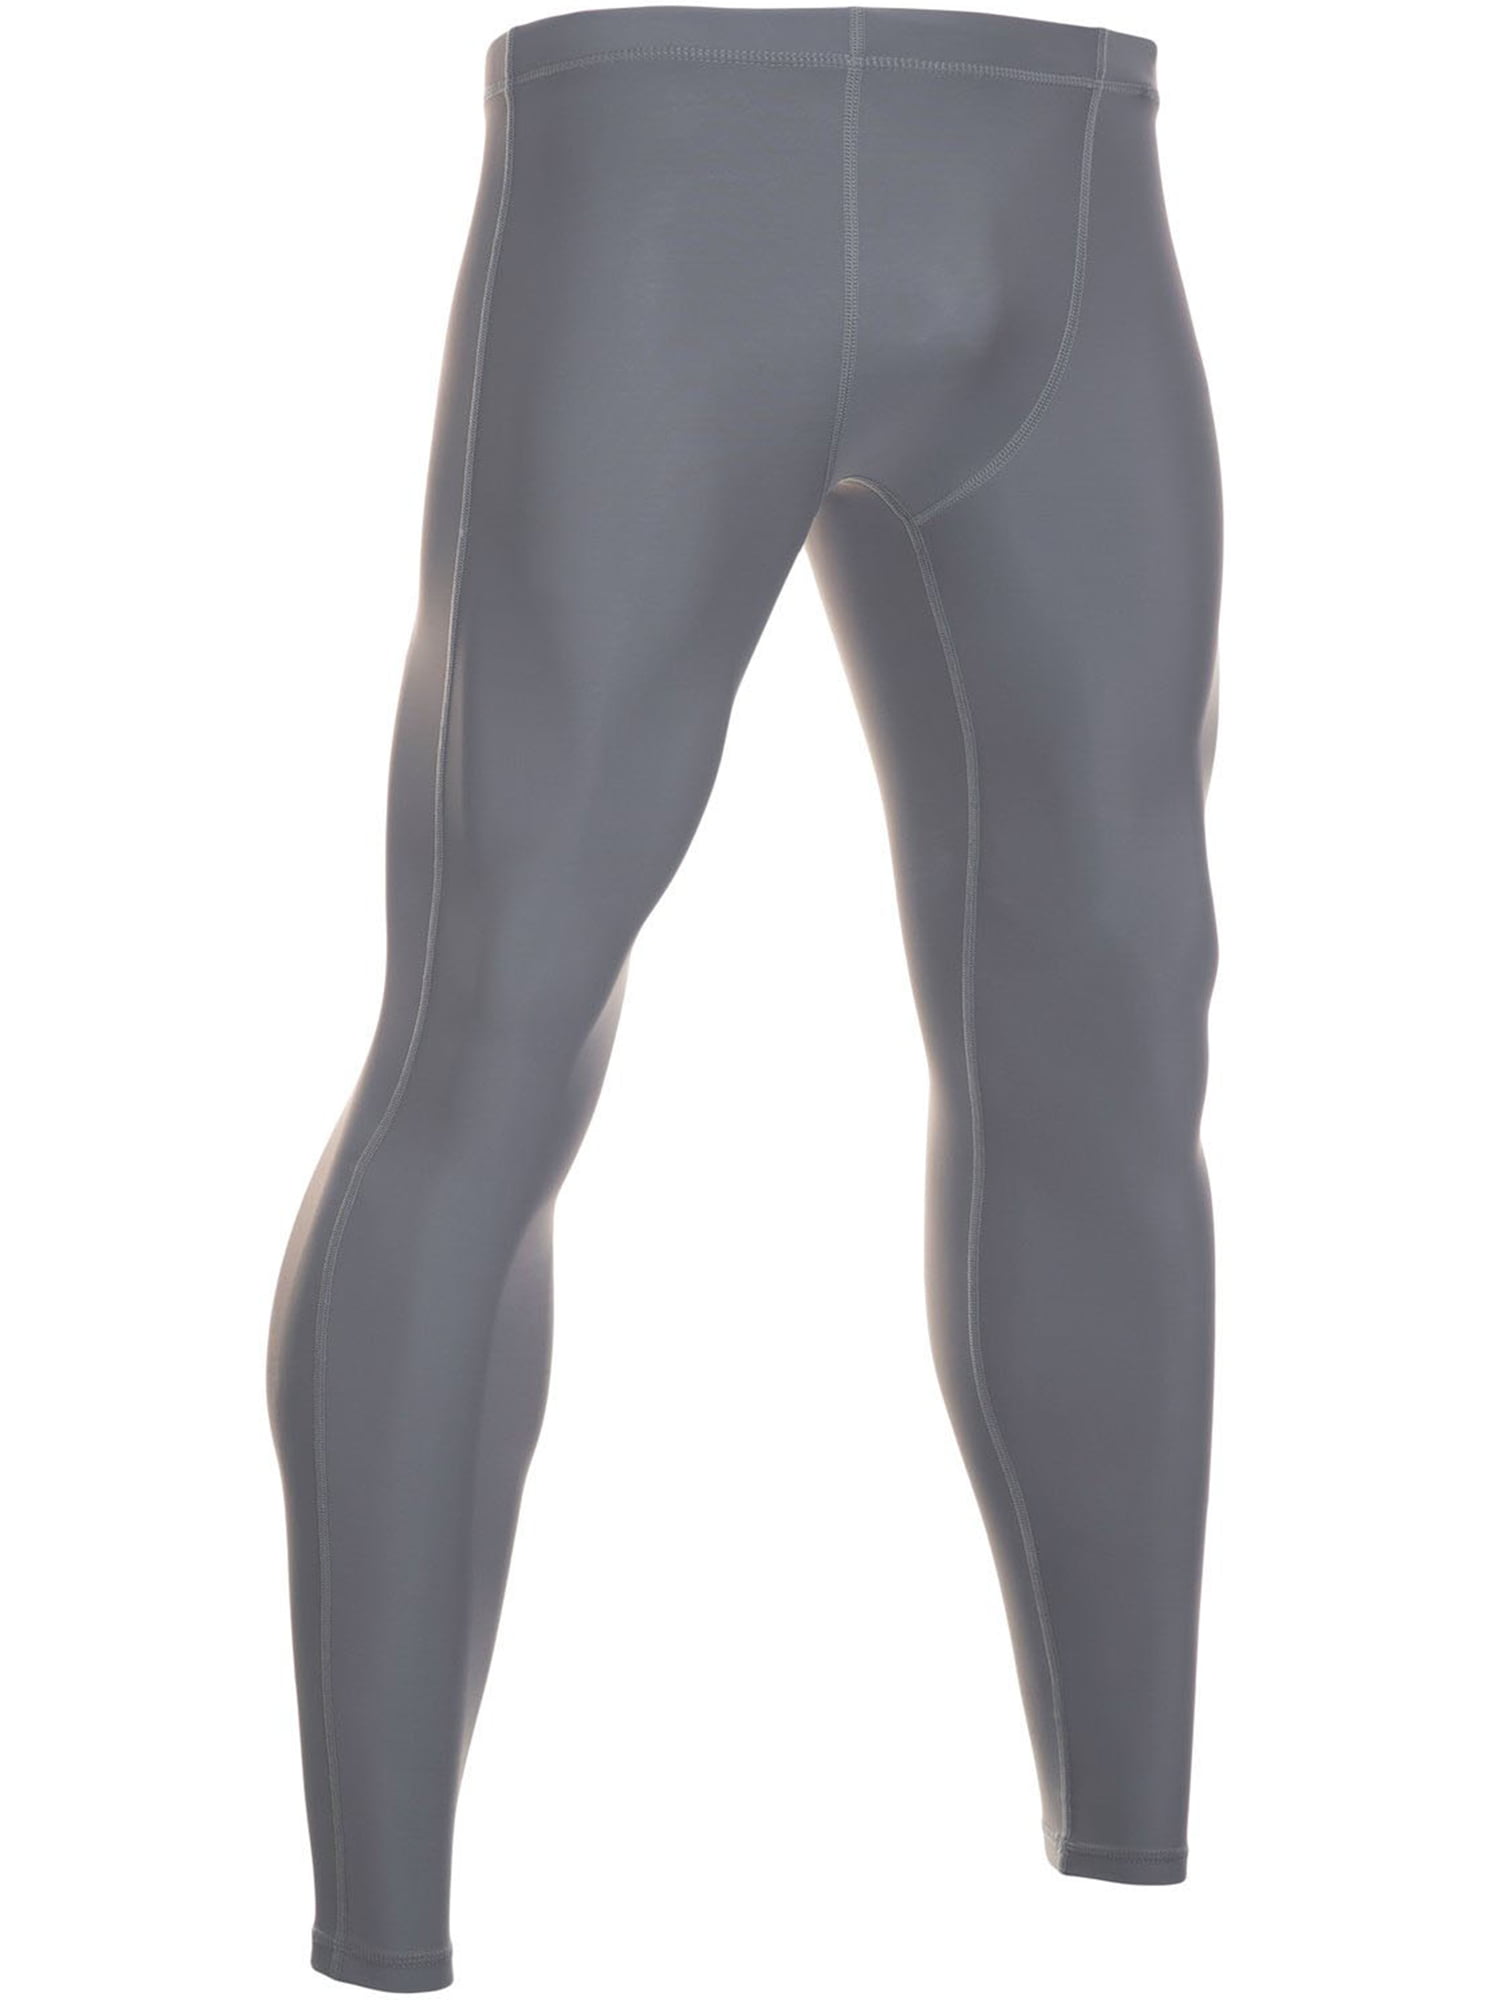 Extreme Hobby Leggings for Men Comfortable fit tights for gym.